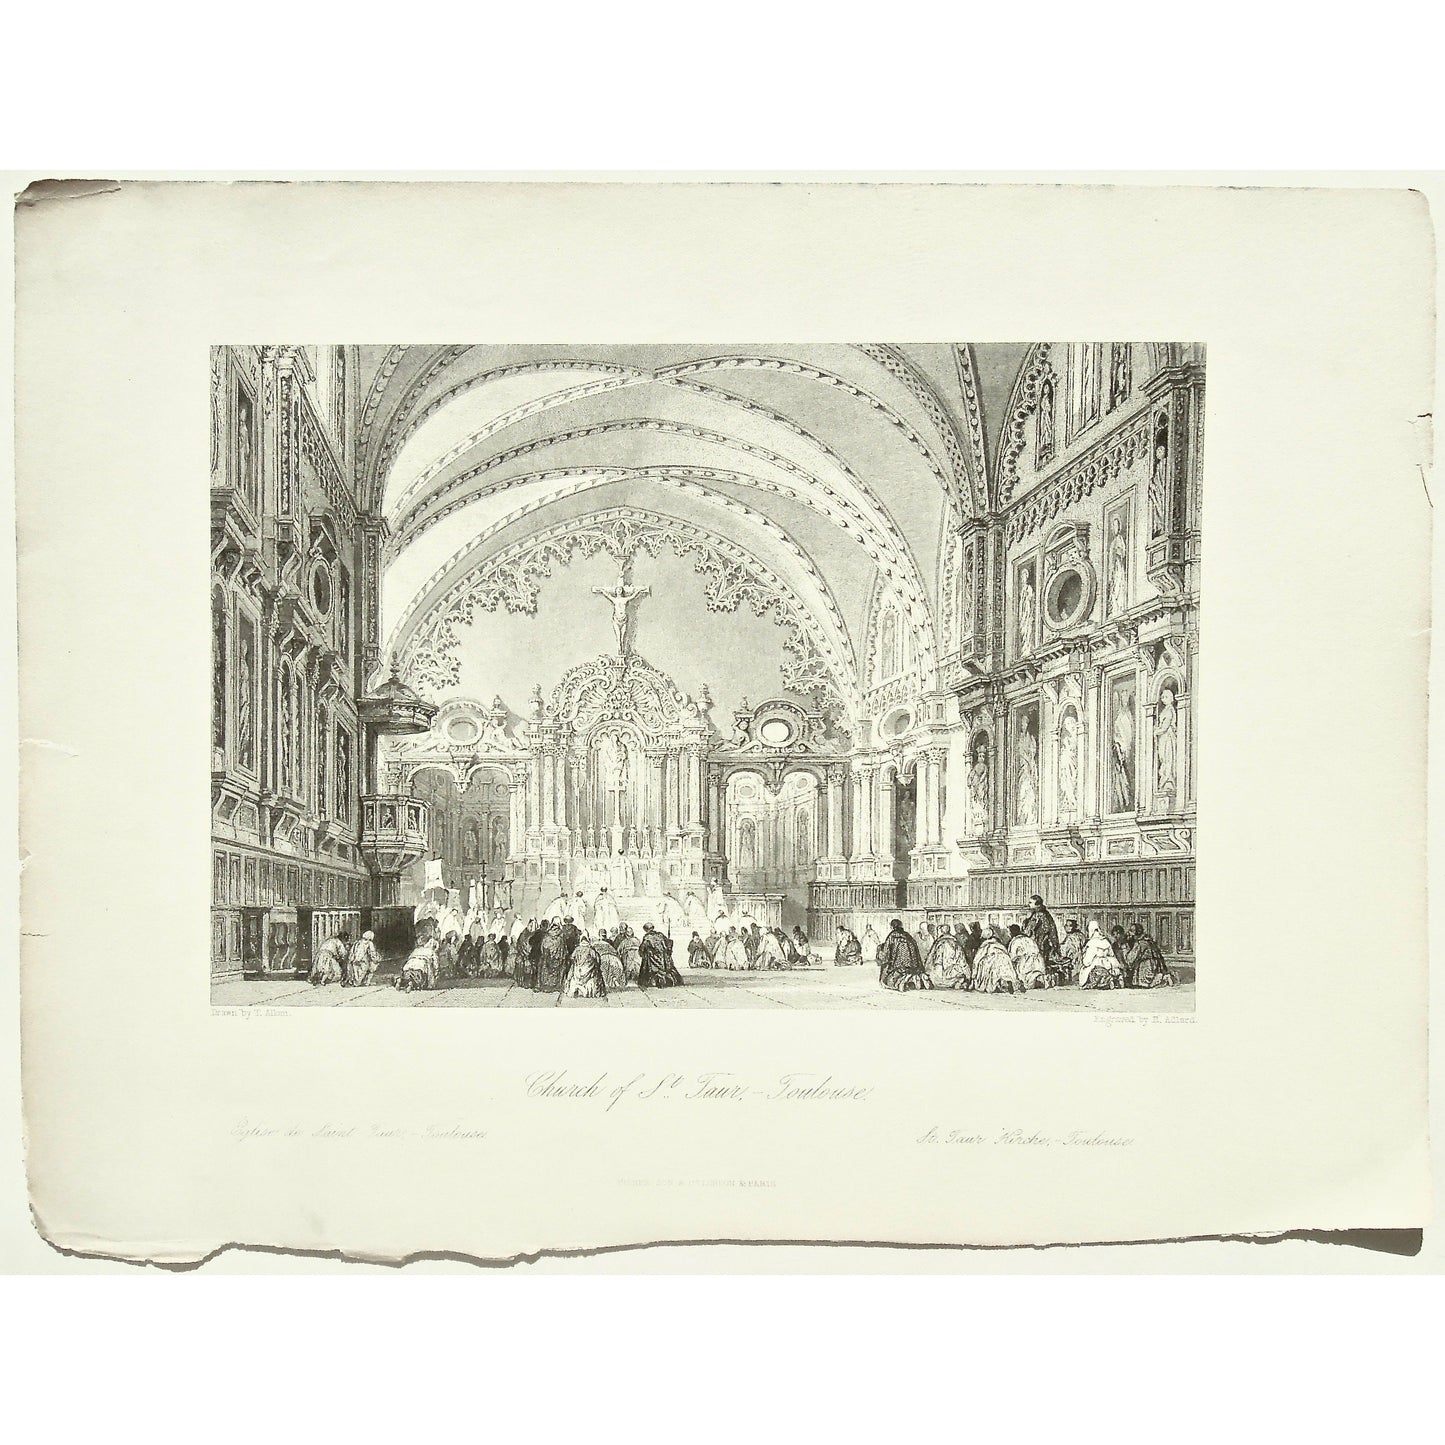 France, France Illustrated, Church of St. Taur, Toulouse, Eglise de St. Taur, Eglise, St. Taur, Church, Kirche, St. Taur Kirche, Ribbed Vaulting, Bid Vaulting, Prayer, Praying, Pray, Worship, Worshipers, Worshipping, Altar, Pulpit, Cross, Decorative ceiling, Kneeling in prayer, Nave, niches, Statues, Tracery, Architecture, Architectural Features, Notre-Dame de Taur, Taur, France, France Illustrated, France Illustrated, Exhibiting its Landscape Scenery, Antiquities, Military and Ecclesiastical Architecture, 